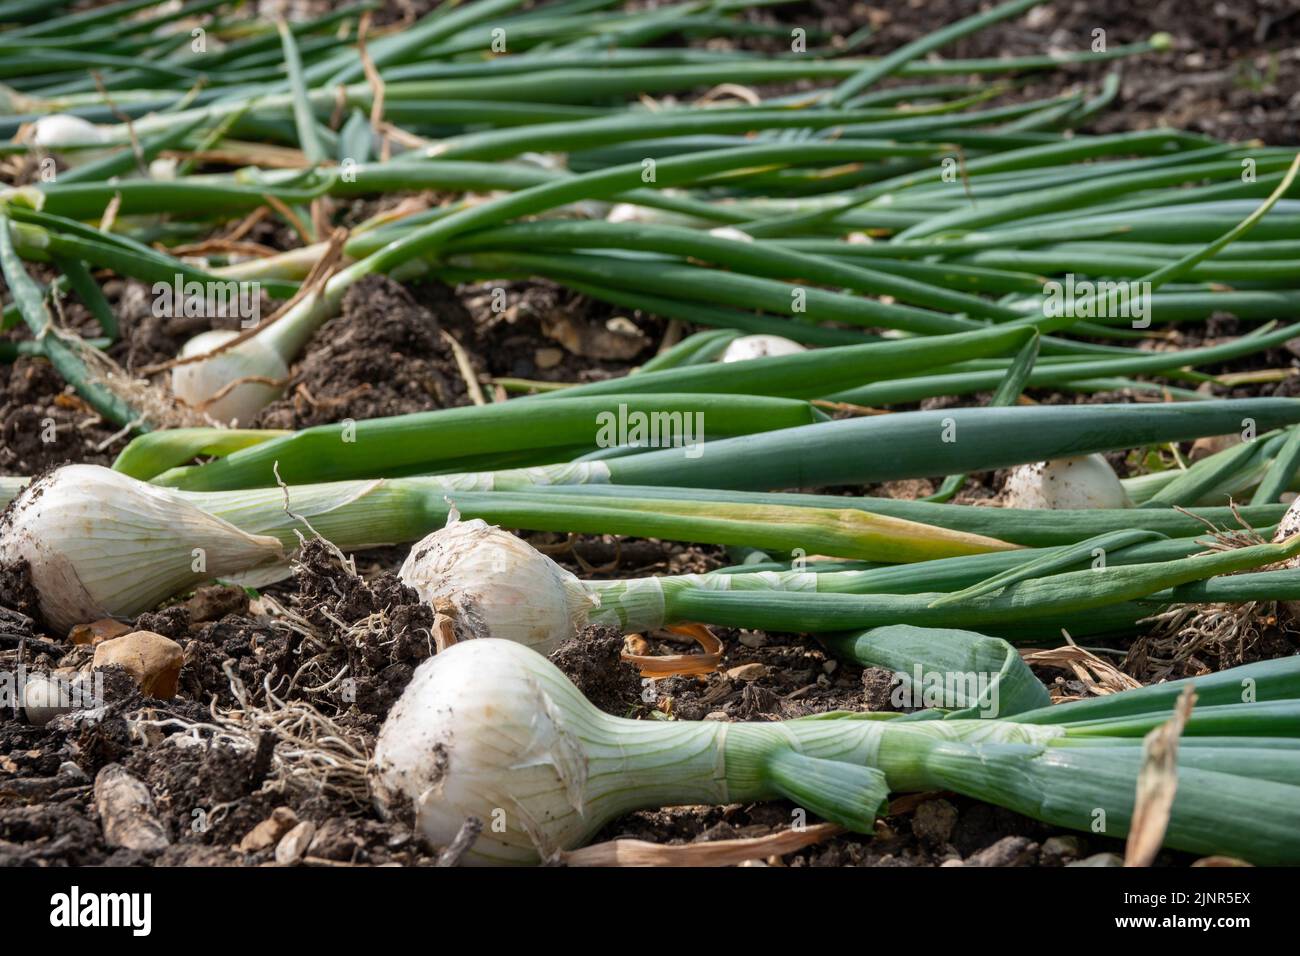 crop of freshly harvested onions Stock Photo